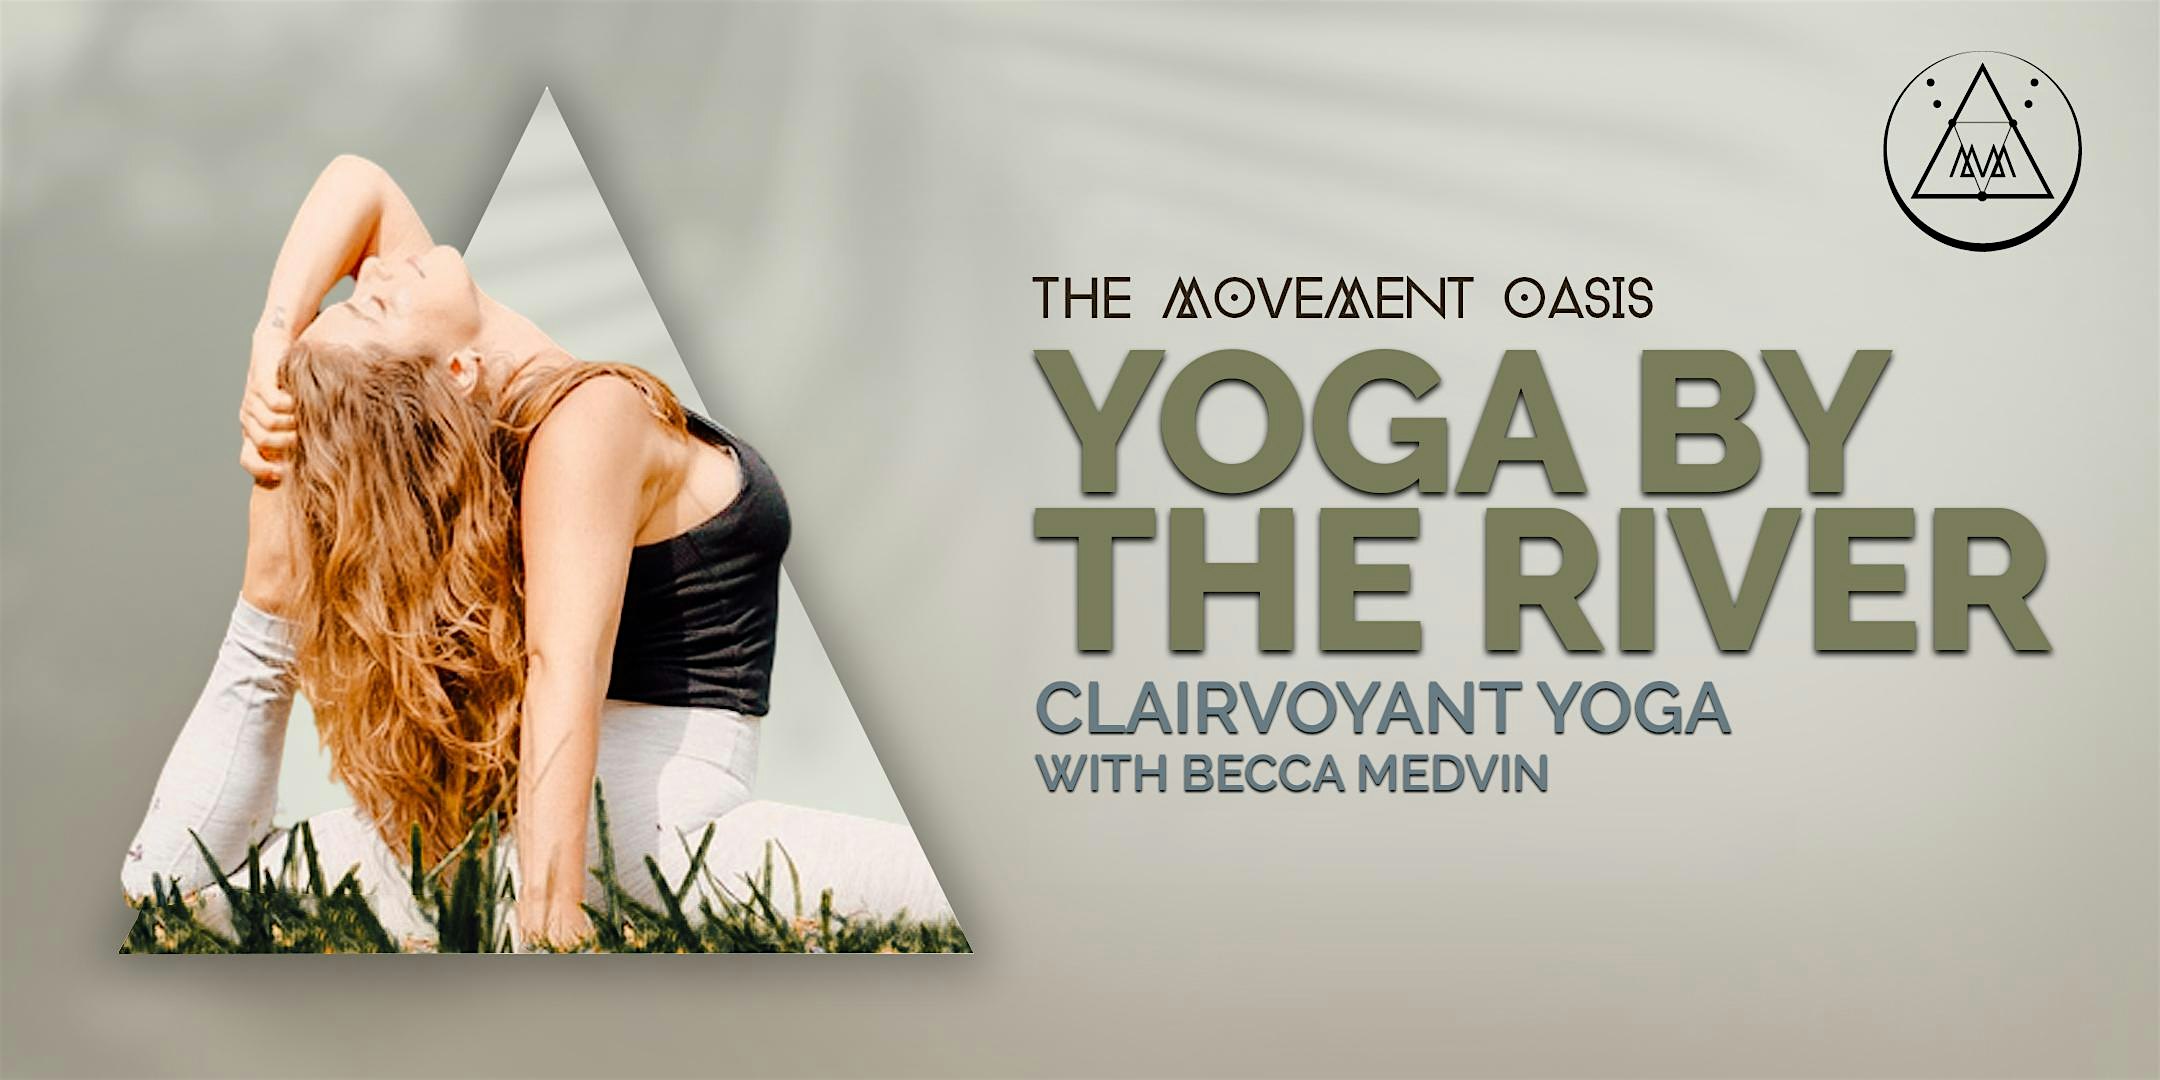 YOGA BY THE RIVER – CLAIRVOYANT YOGA  with Becca Medvin